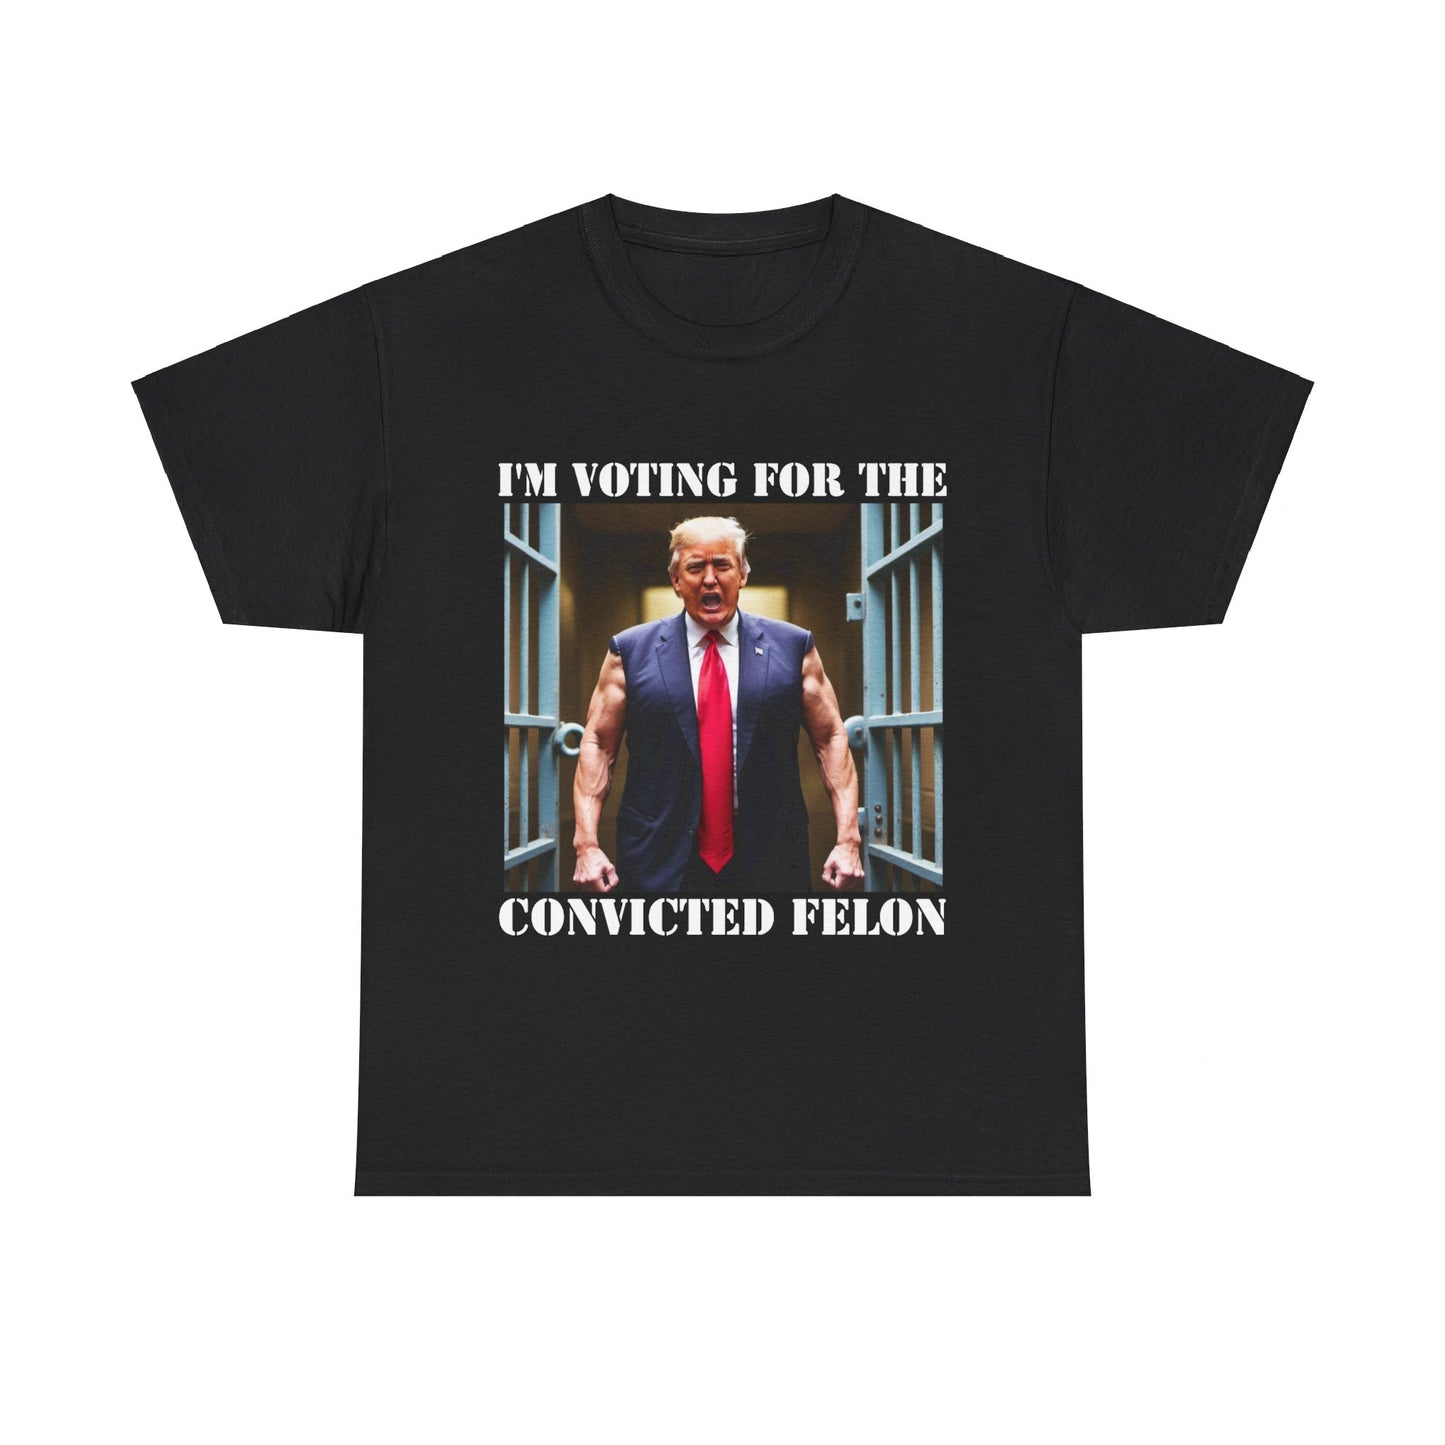 I'm voting for the convicted felon shirt